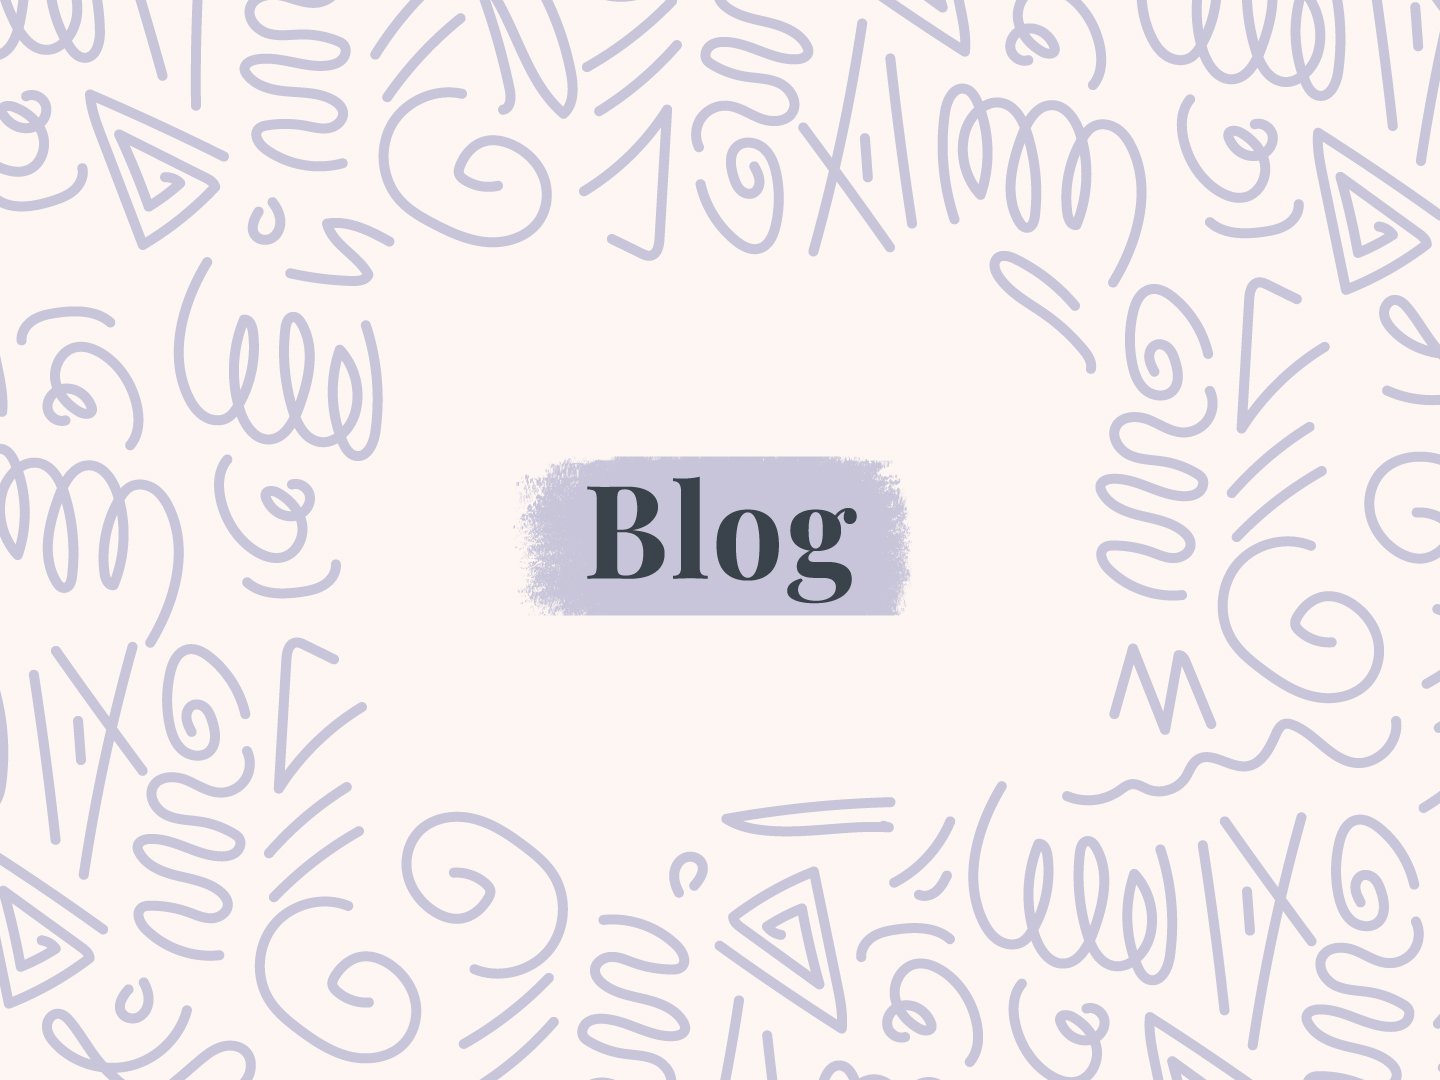 blog with a paint stroke behind and squiggly patterns drawn around it